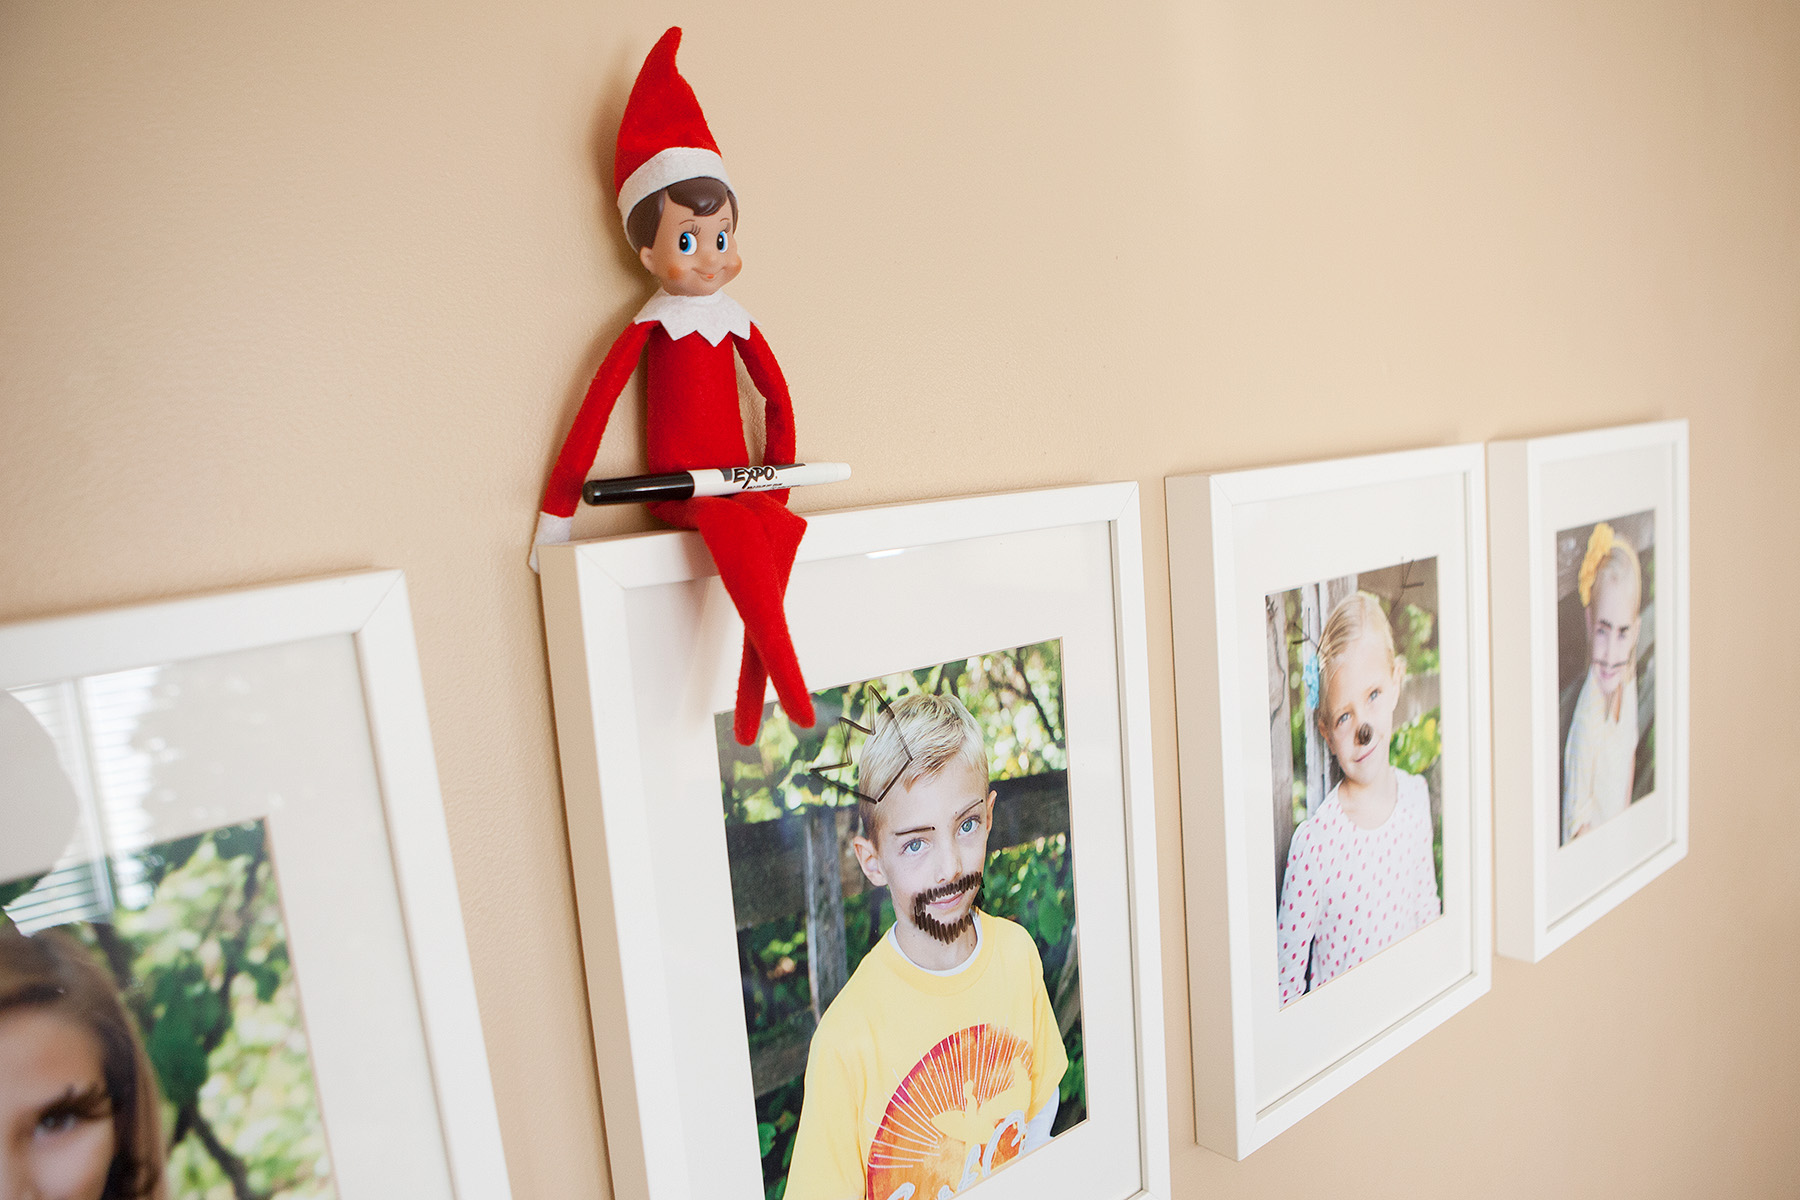 30 fun and unique Elf on the Shelf Ideas - Elf On the Shelf Doodling Faces on Family Pictures